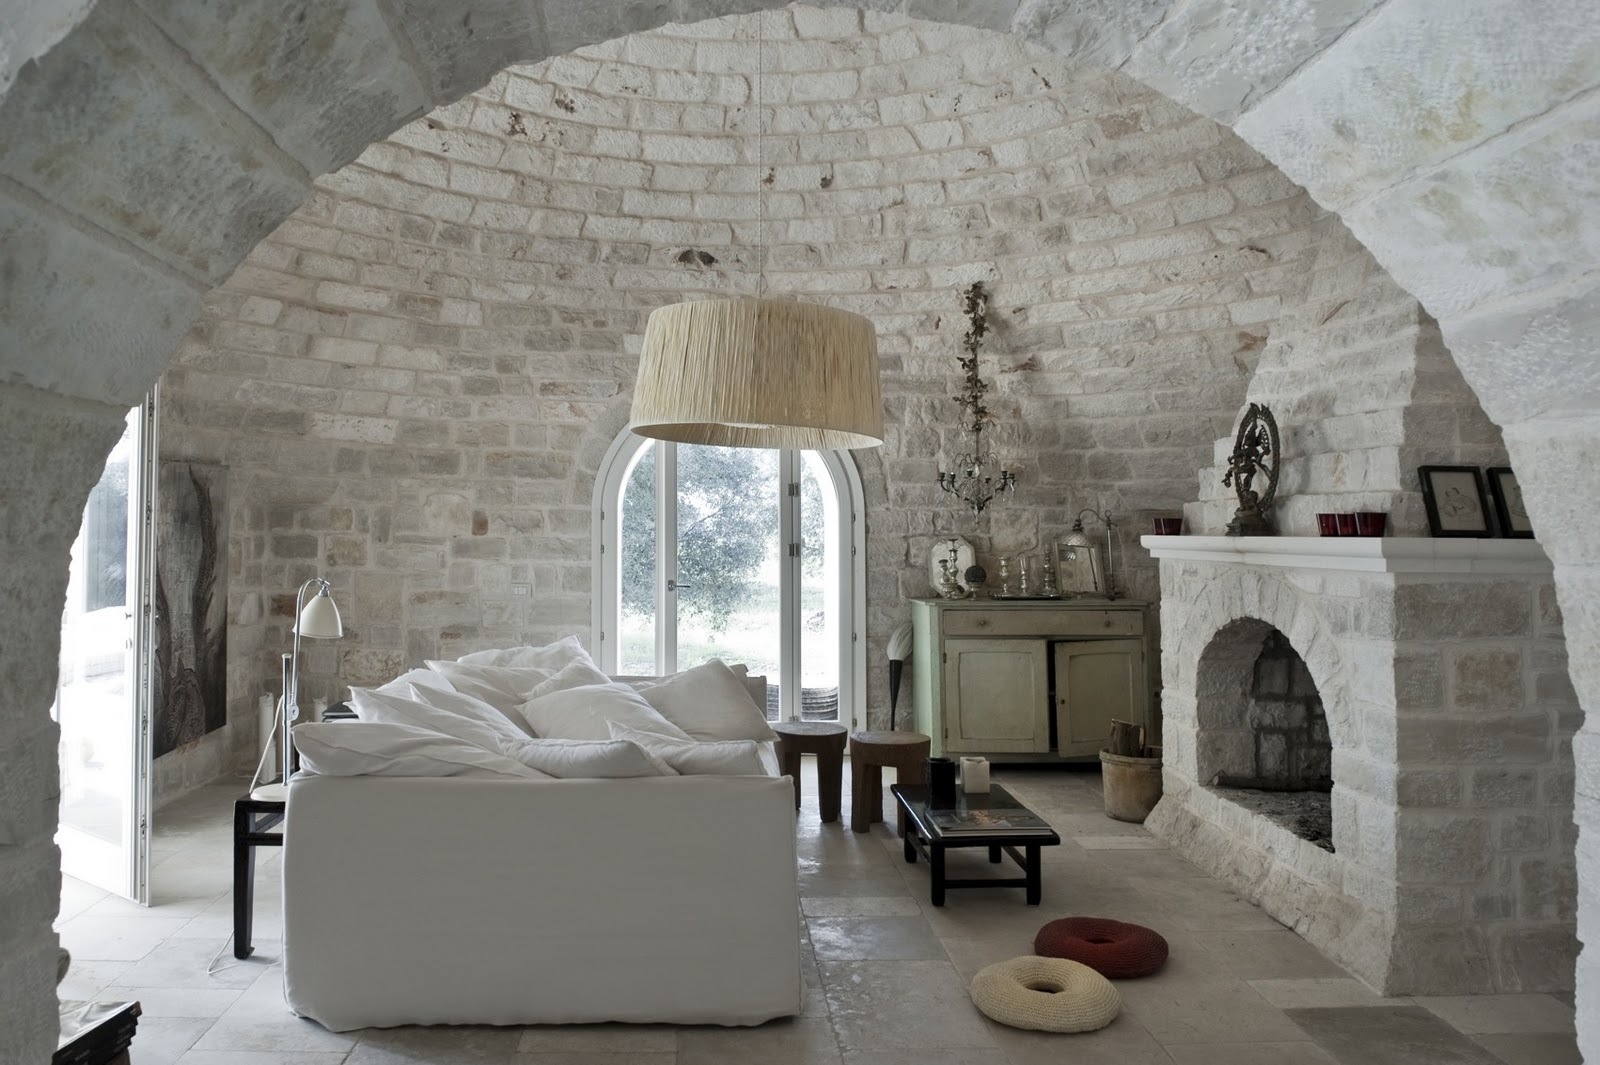 living-in-a-trullo-traditional-apulian-dry-stone-hut-with-a-conical-roof